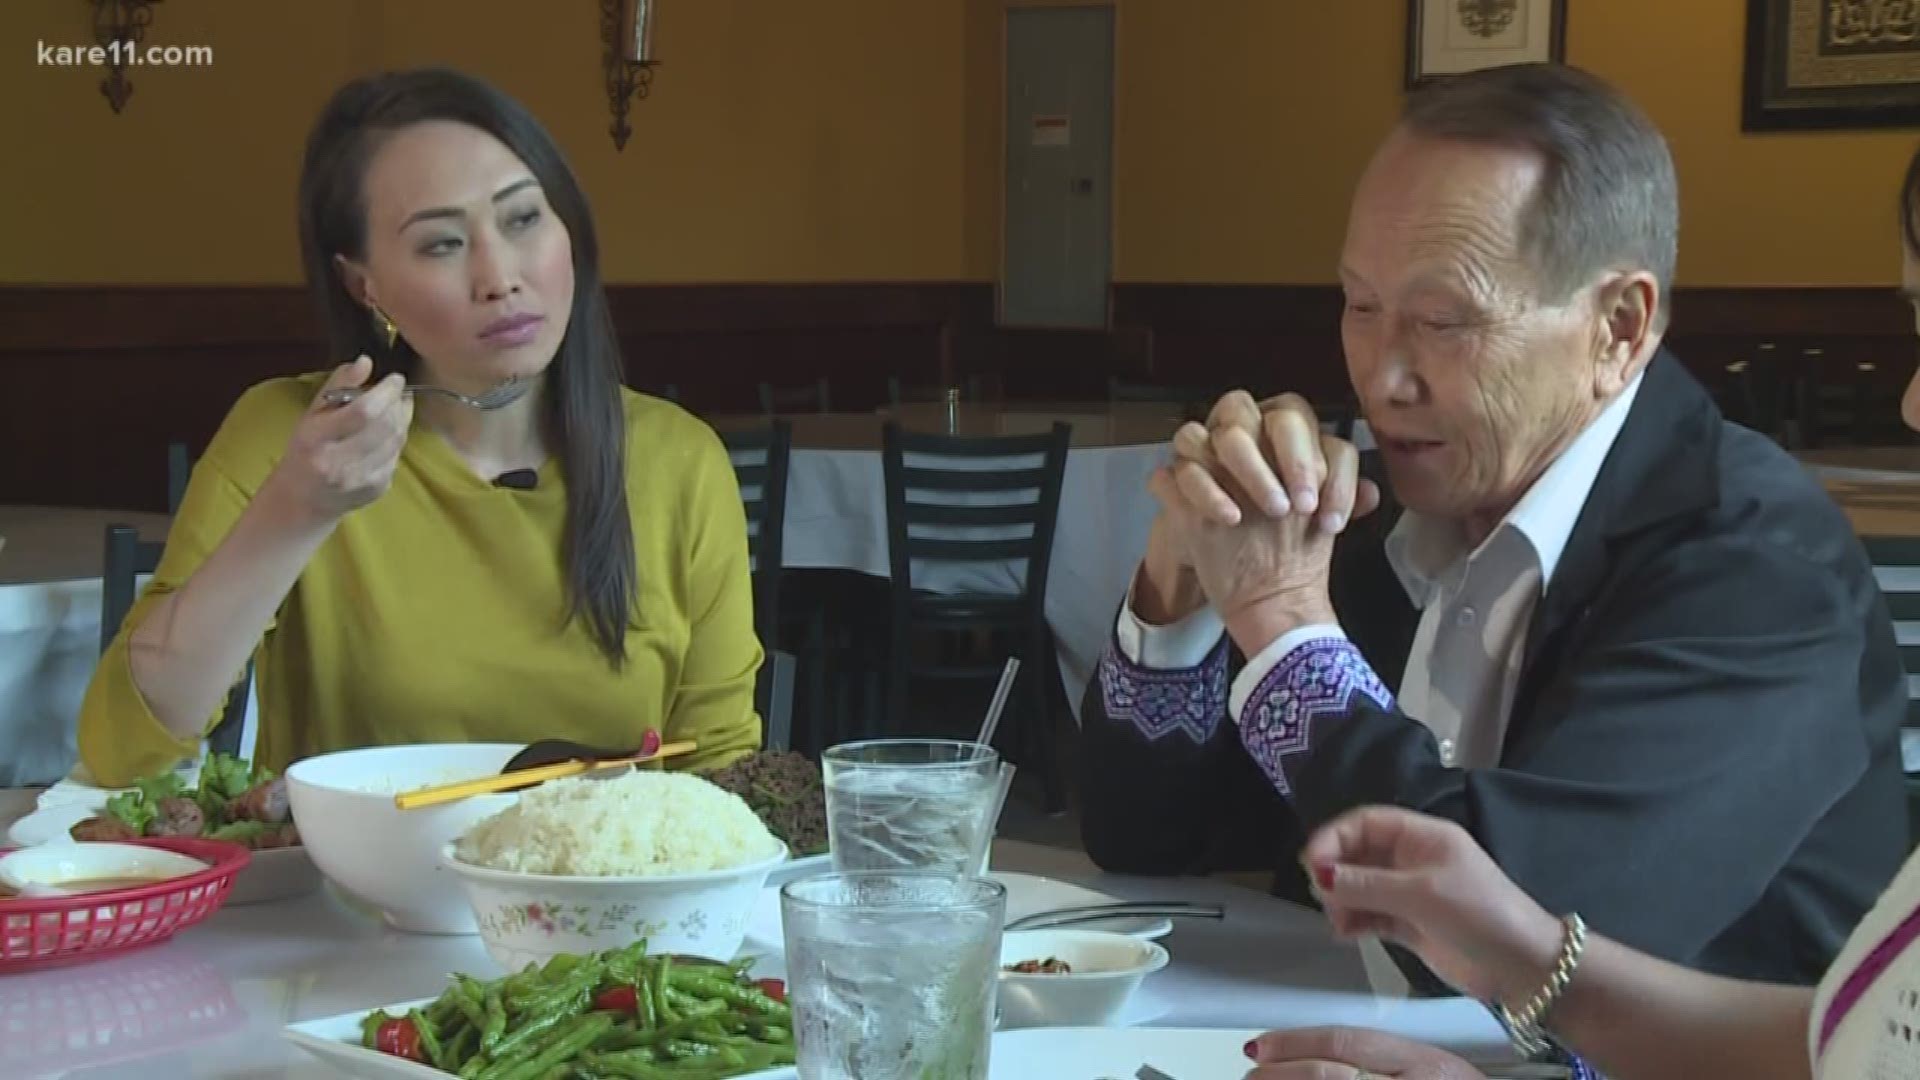 What better way to get to know what makes a person tick than to meet their family? We did just that, sitting down with the parents of new KARE 11 Sunrise anchor Gia Vang.